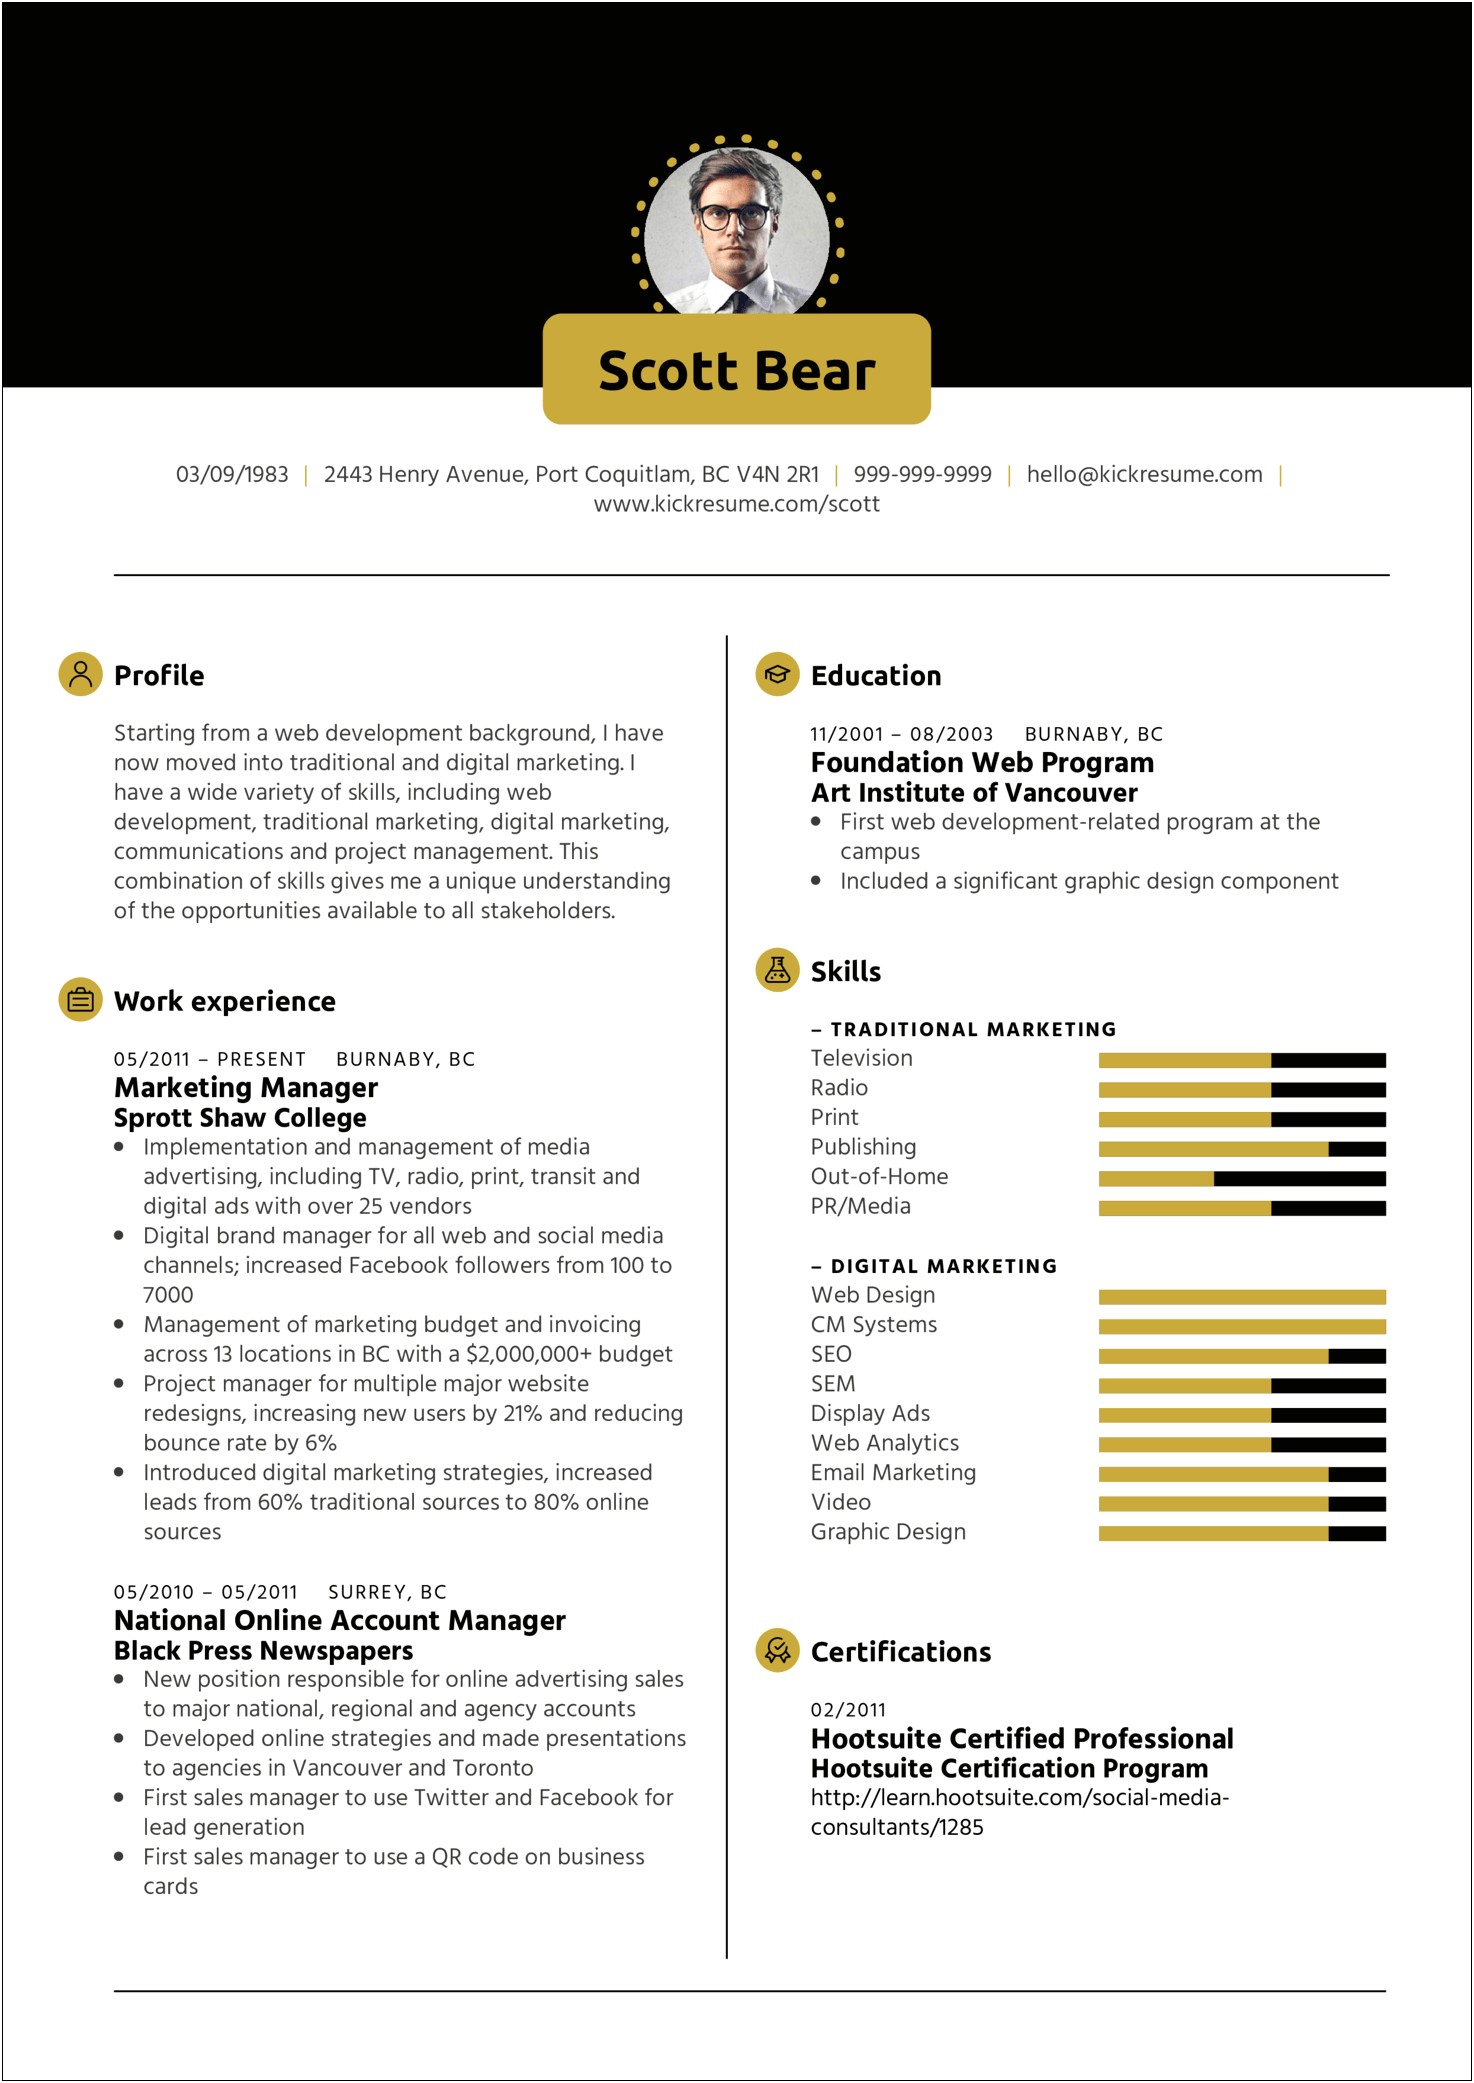 Resume Of Sales And Marketing Manager